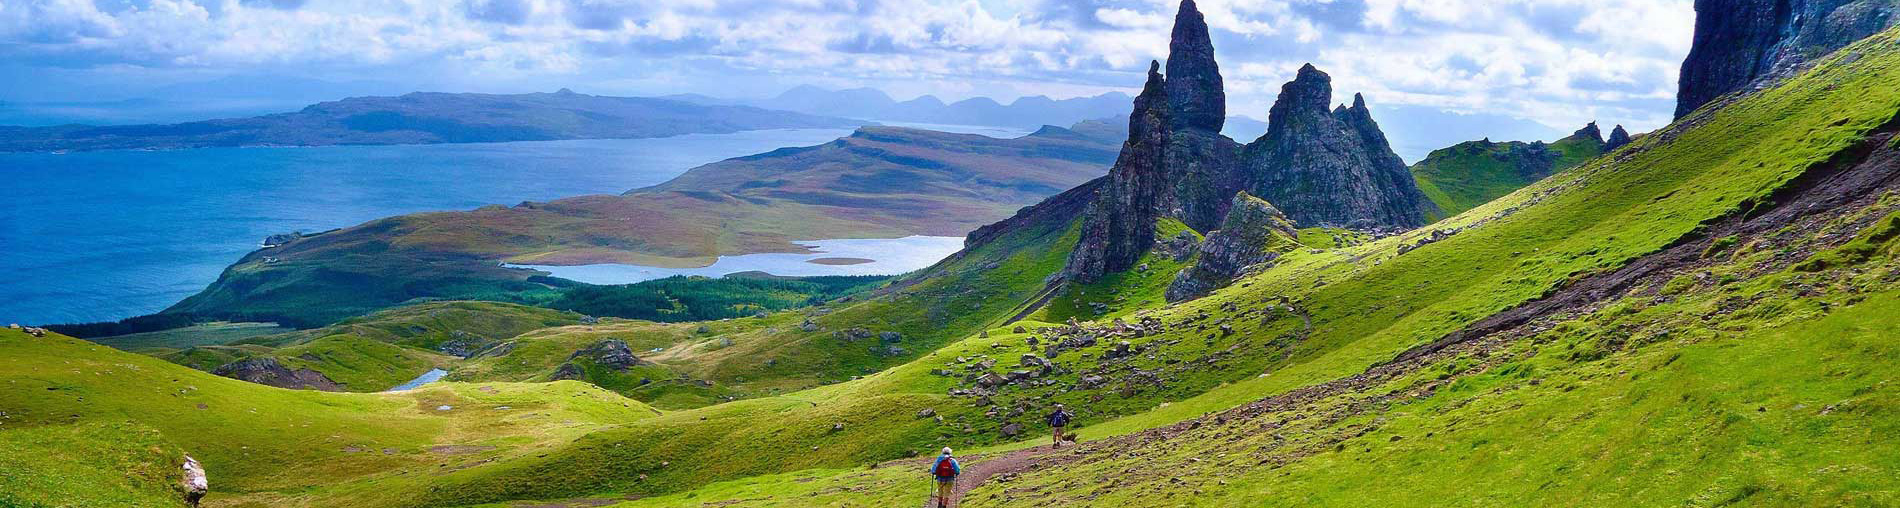 Affordable Holiday Tour Packages to Scotland